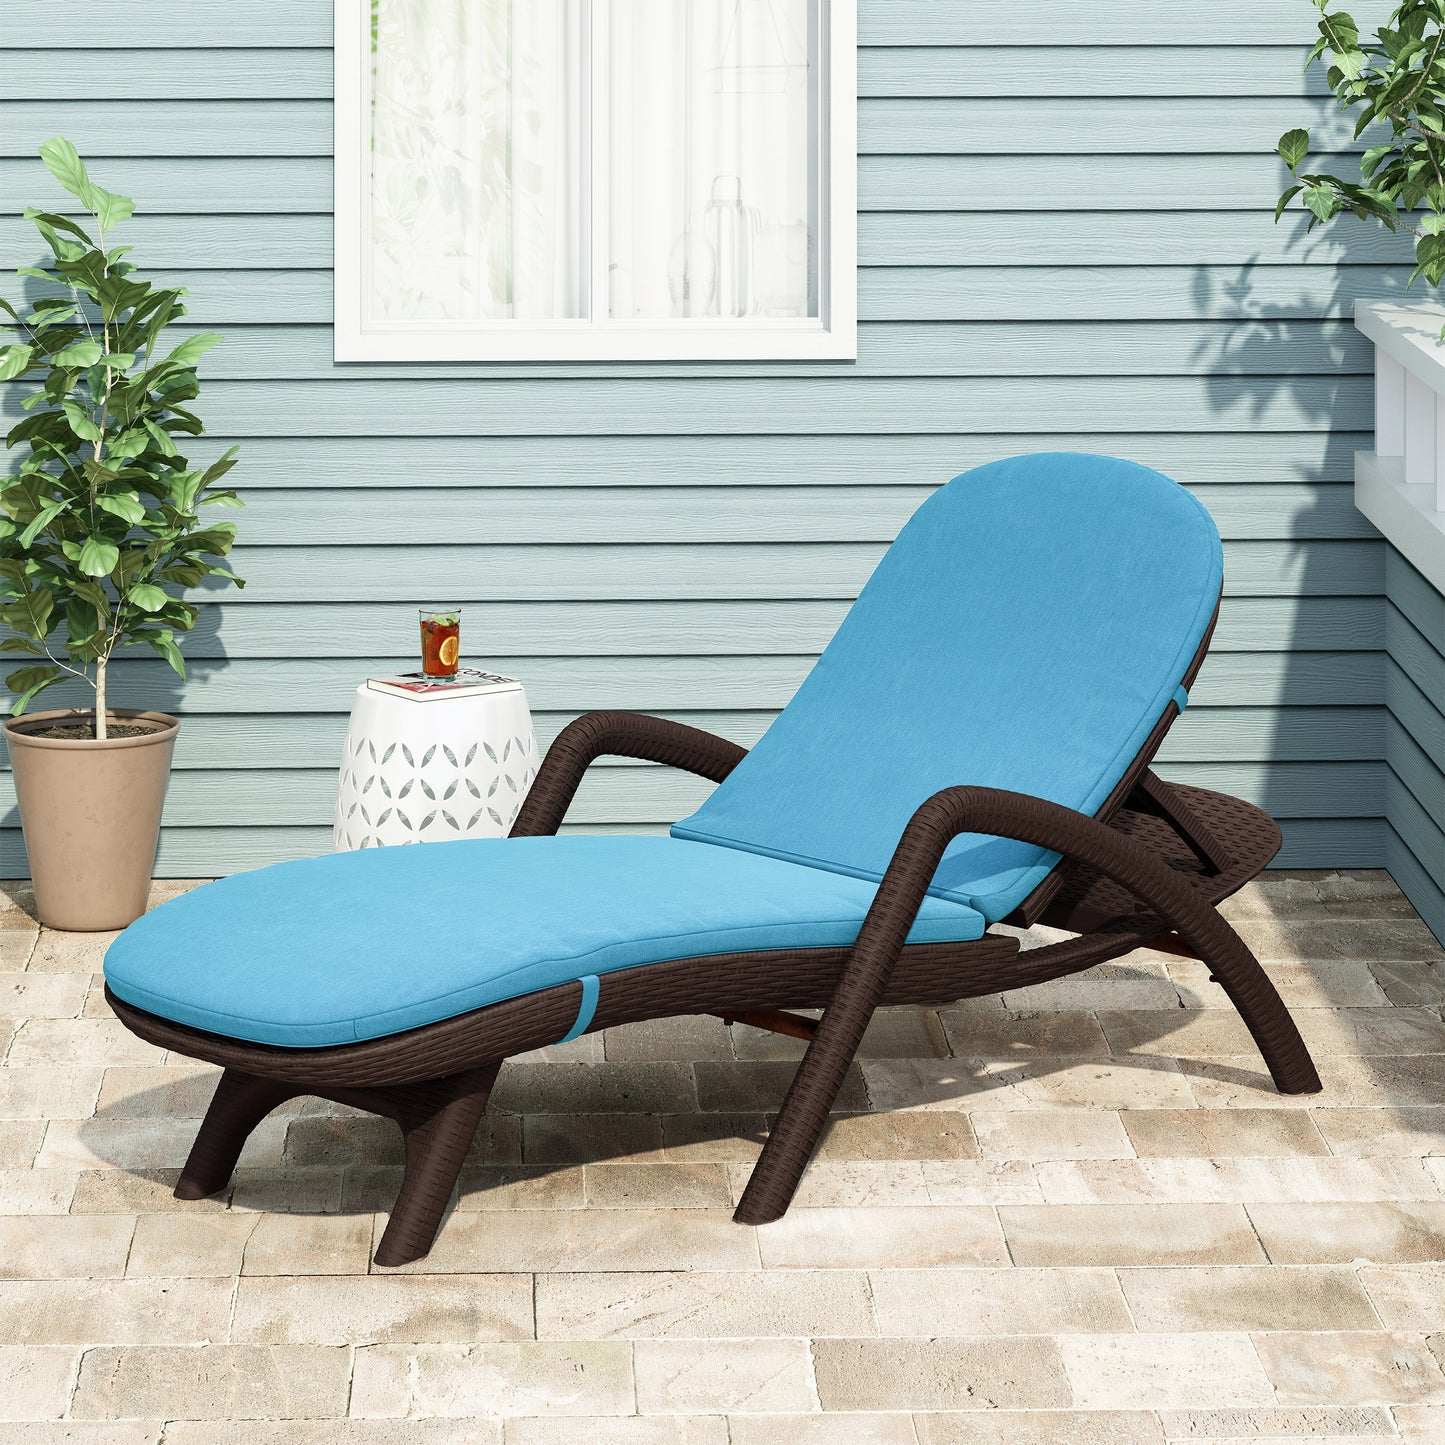 Farirra Outdoor Water Resistant Chaise Lounge Cushion